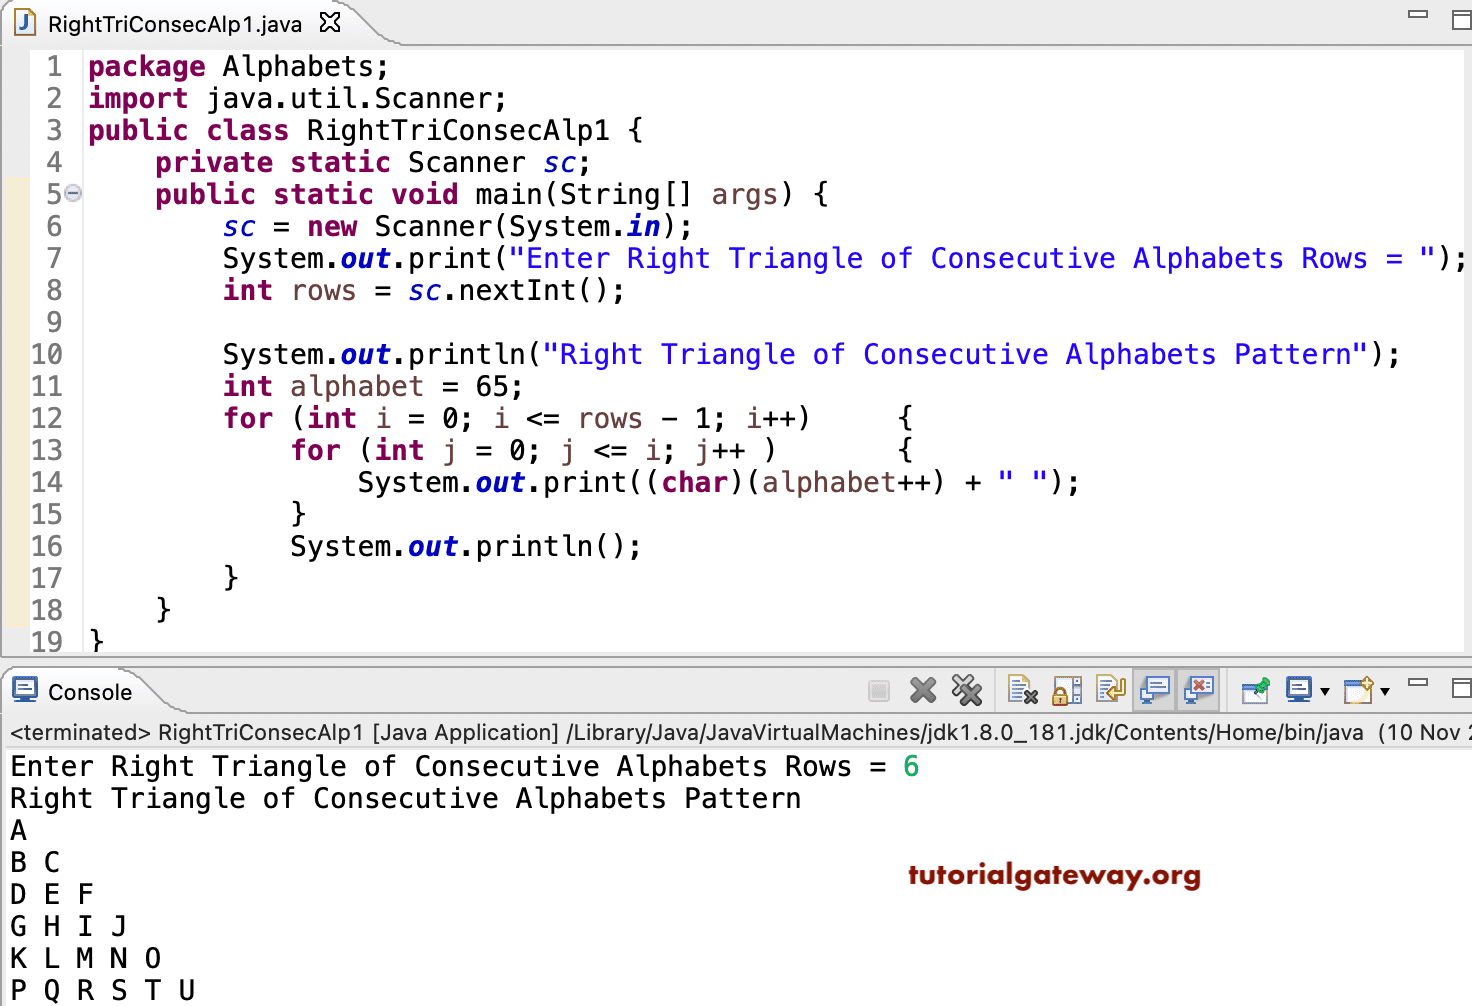 Java Program to Print Right Triangle of Consecutive Alphabets Pattern